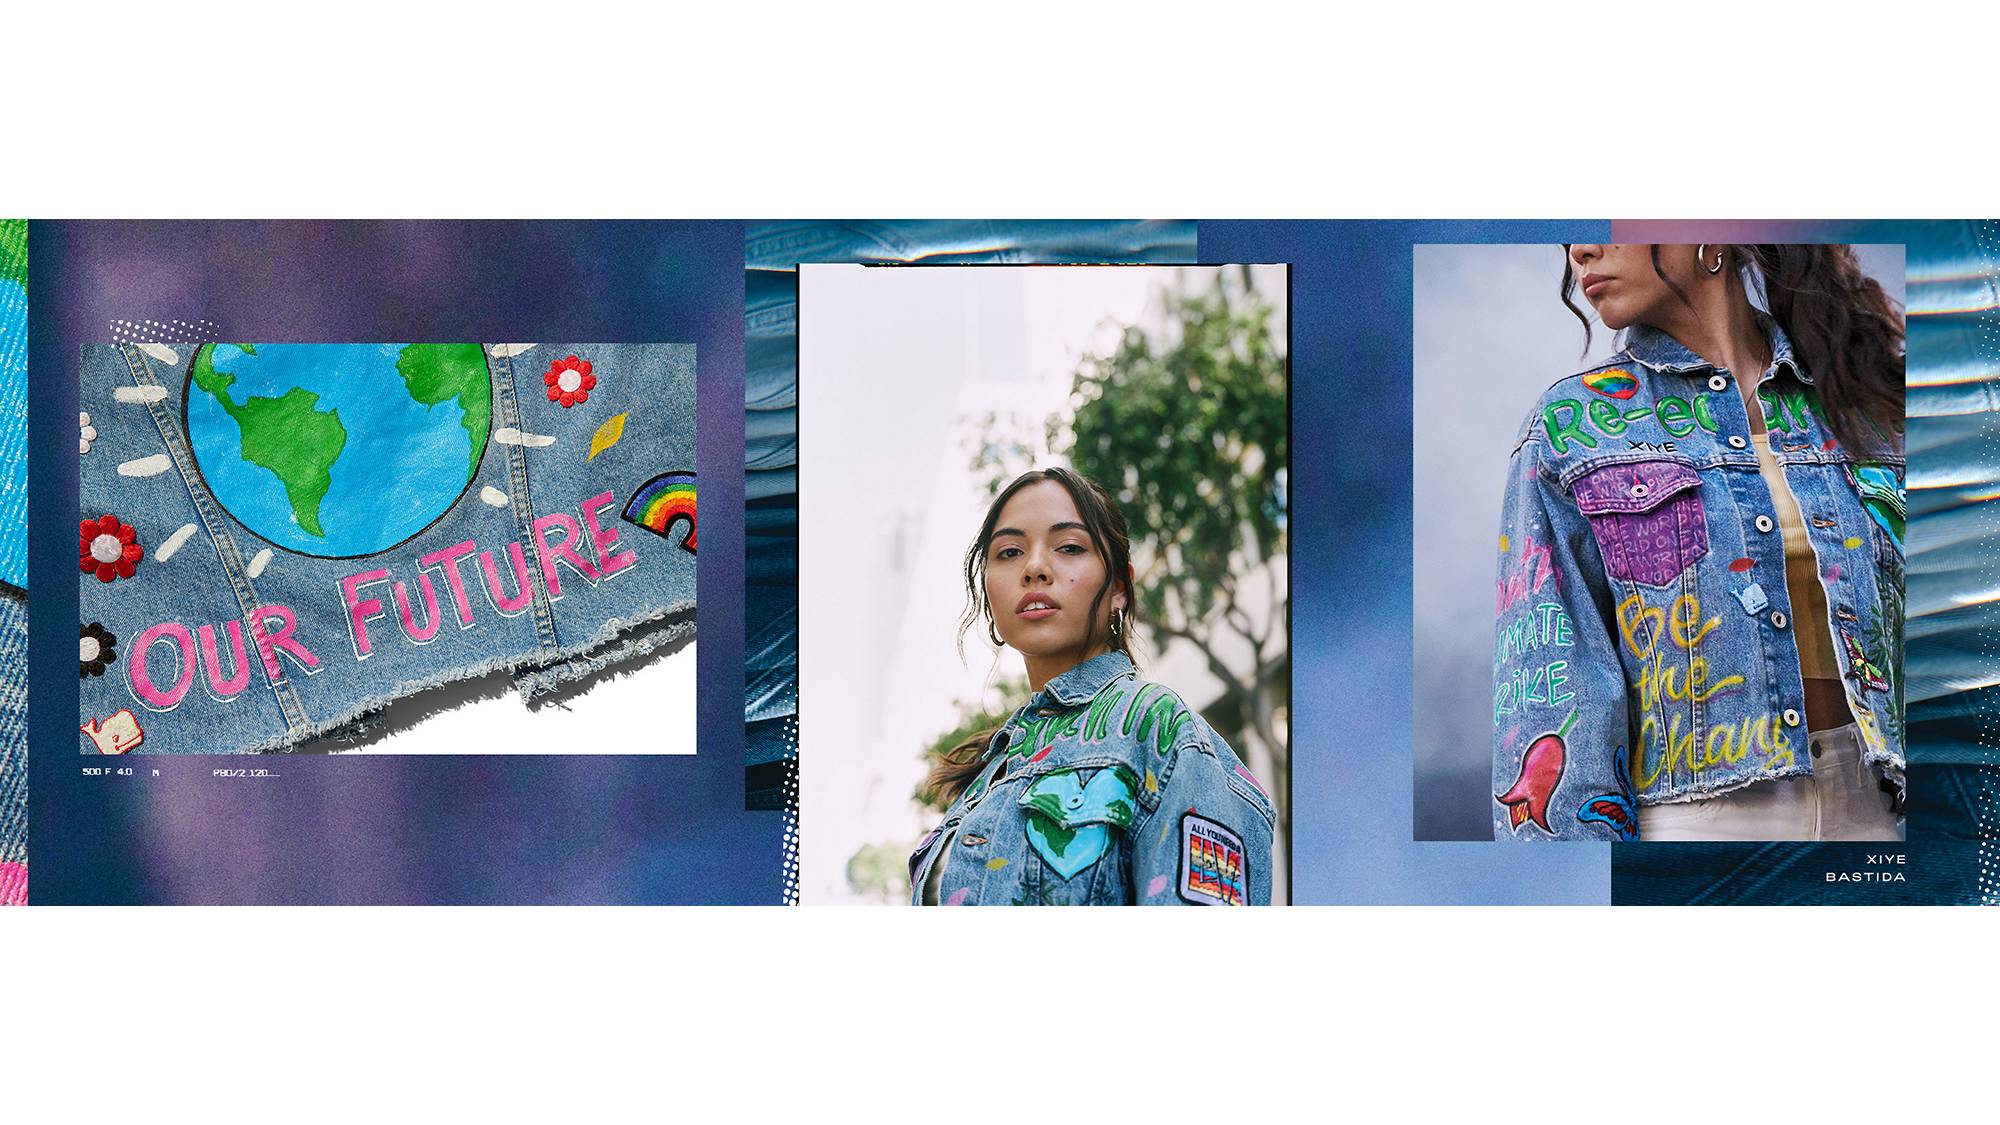 Three photos. The first is a zoomed in shot of a Levi's trucker jacket with a world painted on it and the words "Our Furture". The second is a portrait shot of Xiye Bastida wearing a hand painted Levi's Trucker jacket. The third photo is a zoomed in shot showcasing Xiye's unique hand painted trucker jacket that features flowers, a purple pocket, and text that says, "Climate Strike" as well as "Be the Change"